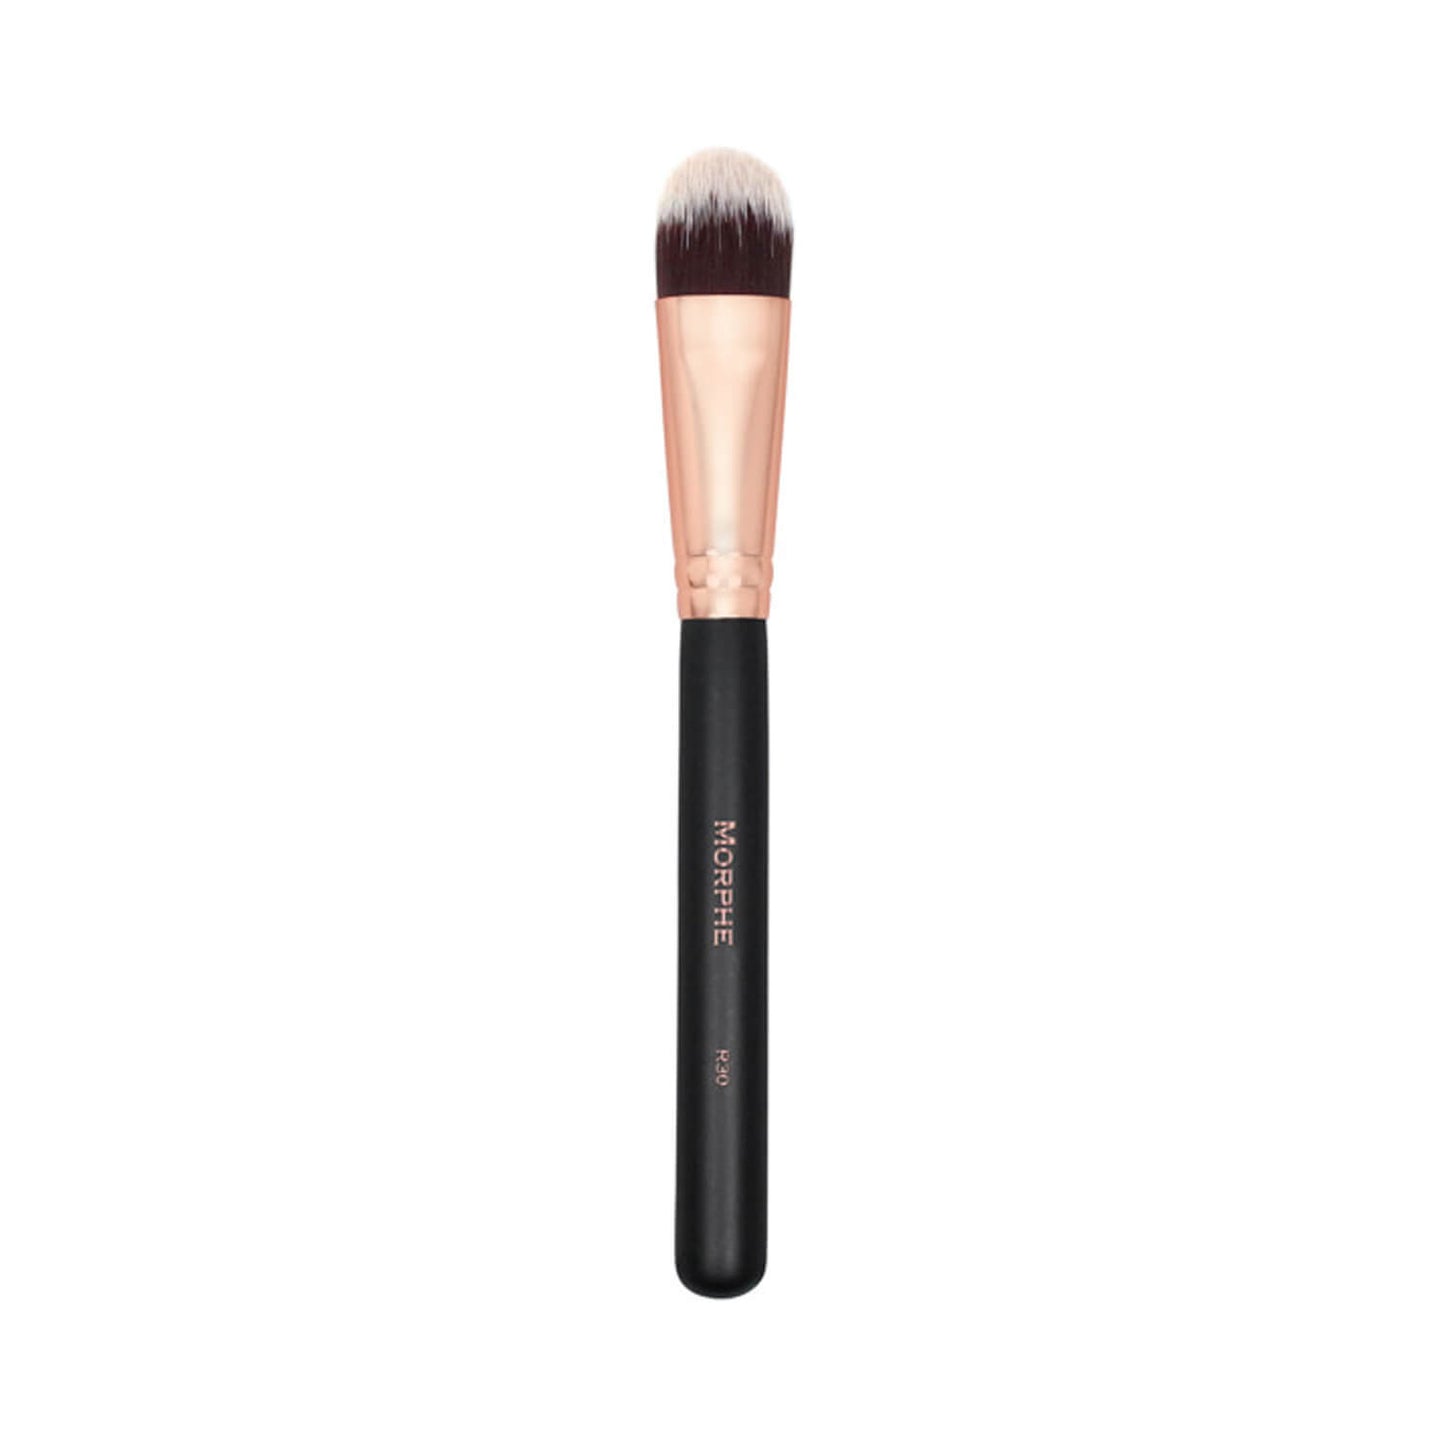 Morphe Cosmetics R30 Deluxe Oval Foundation Brush